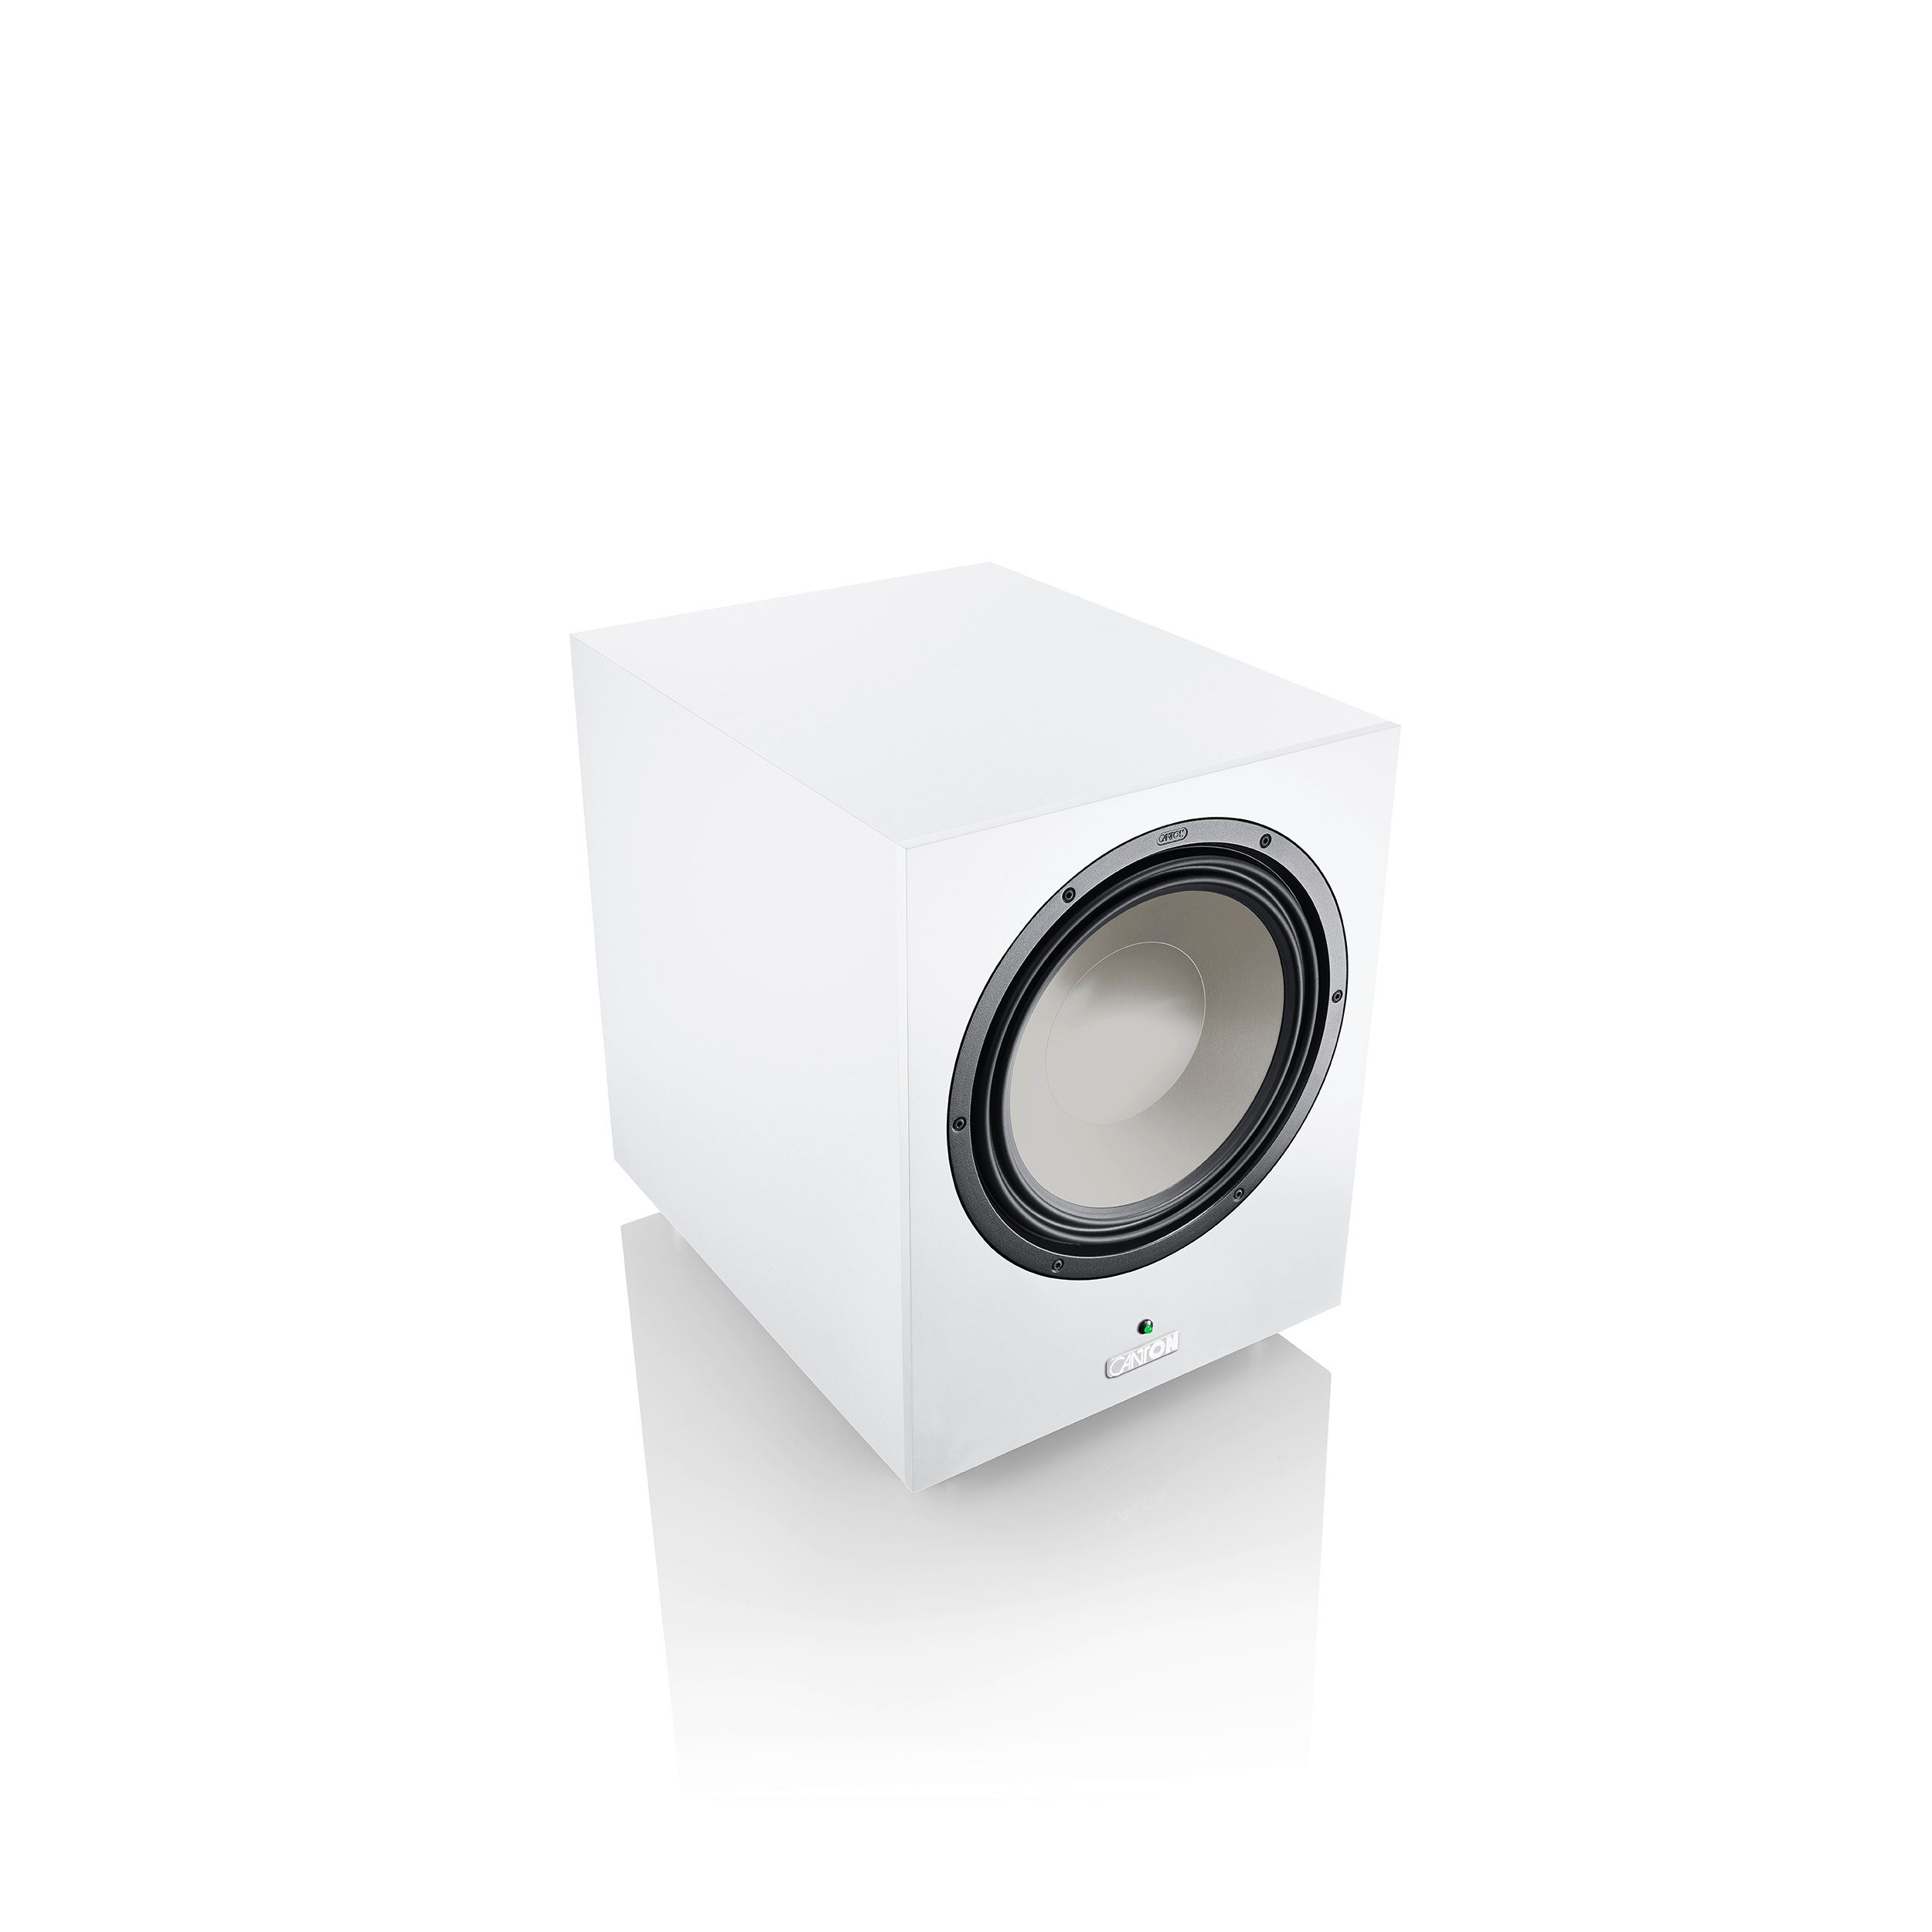 CANTON Power 10 Sub Subwoofer weiss